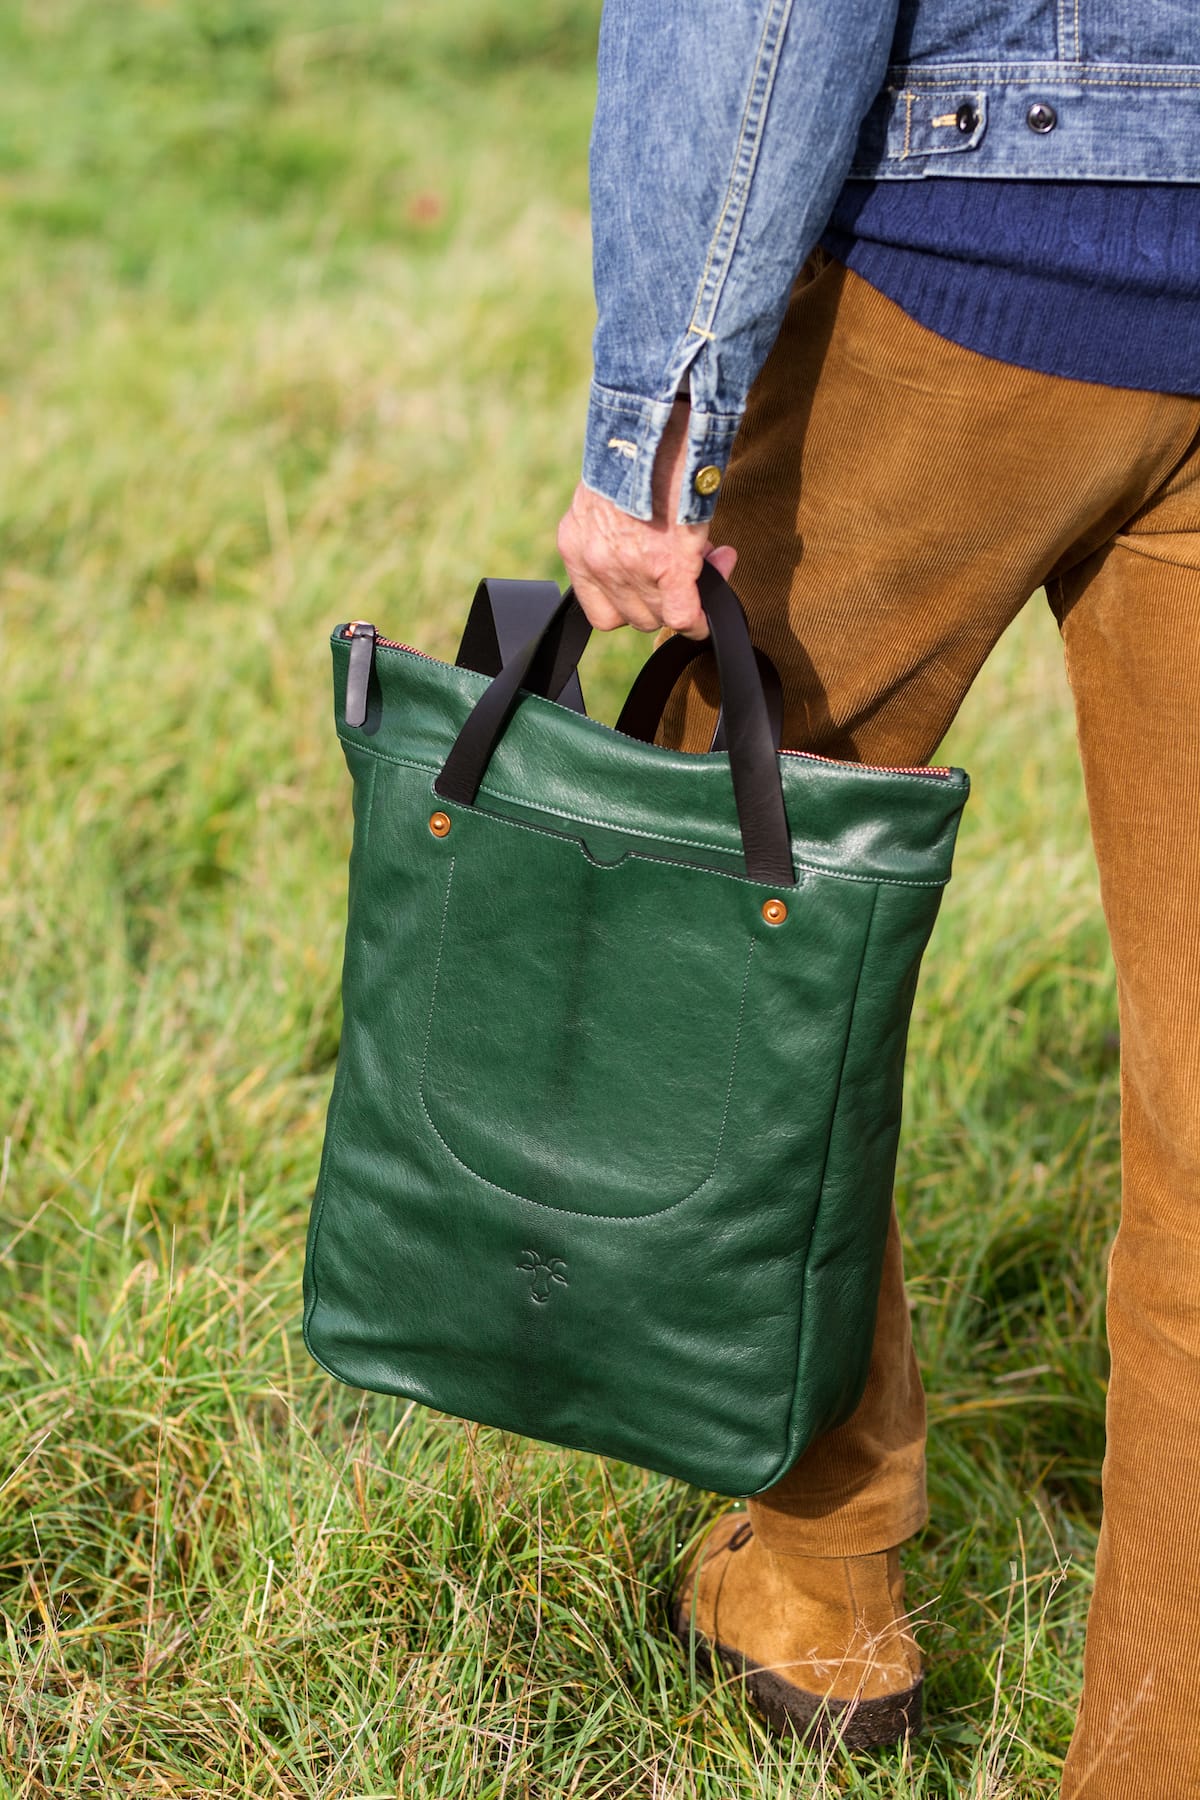 24 functional and stylish work bags for men